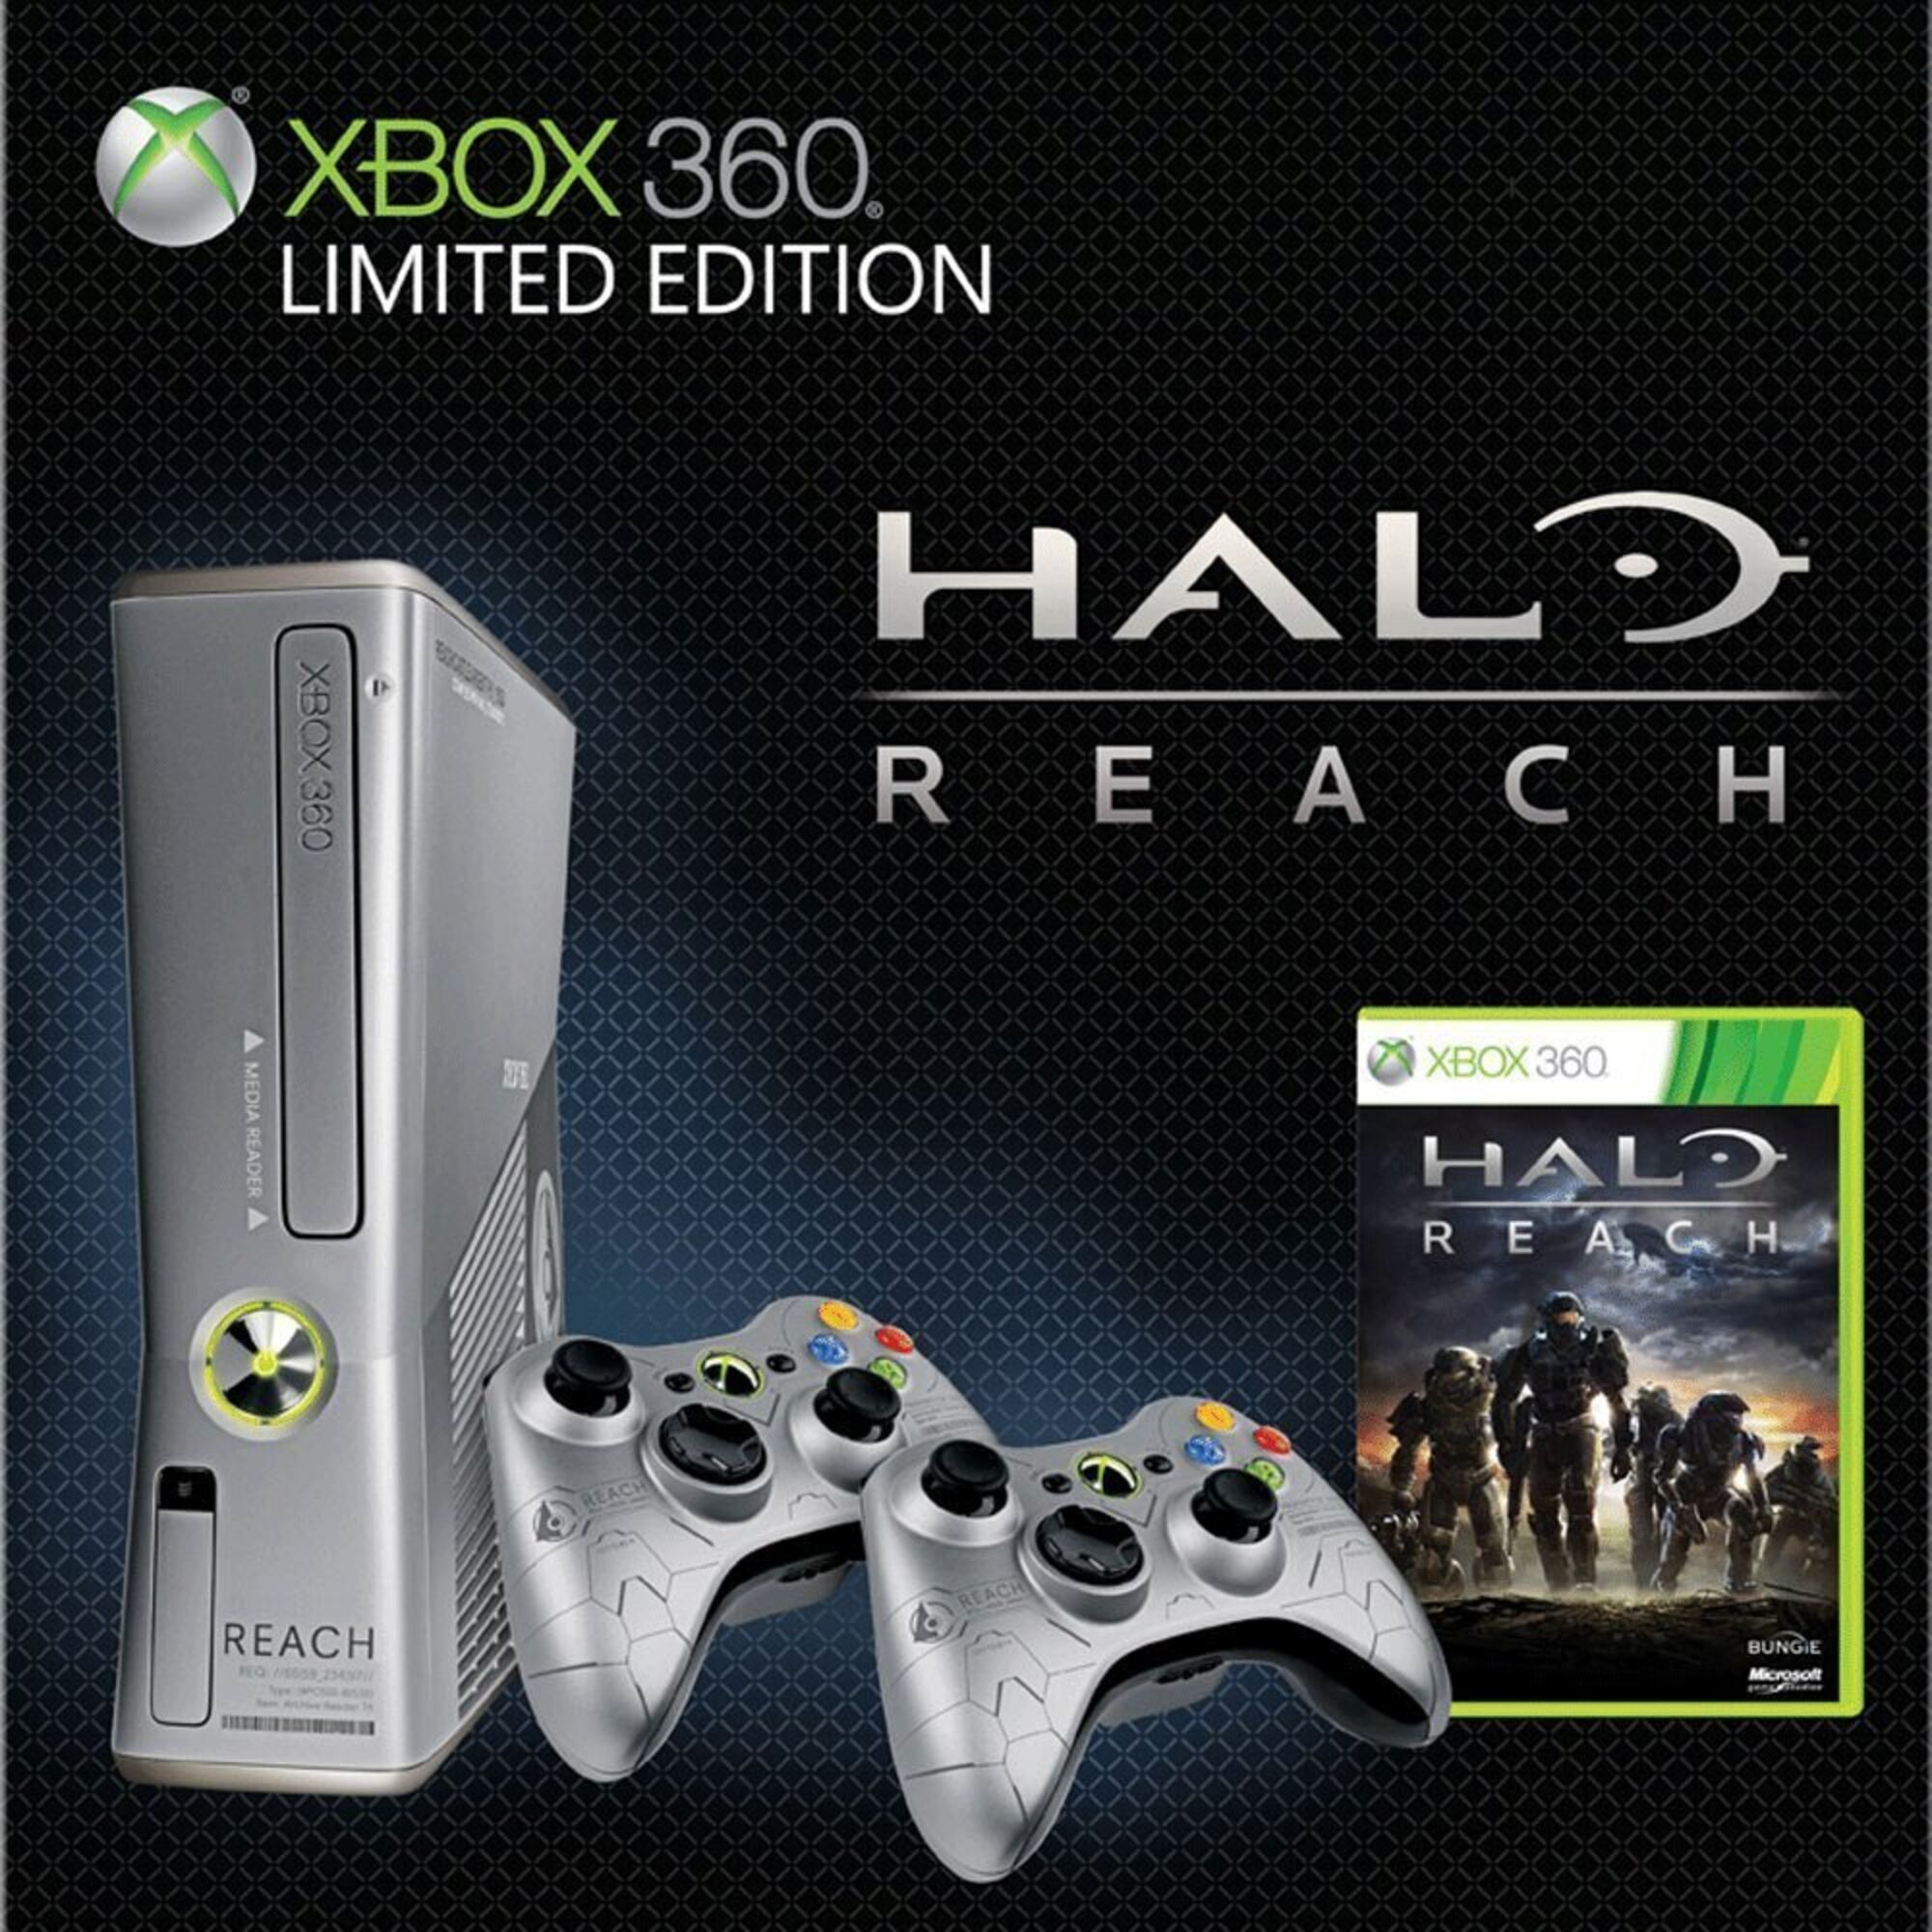 Xbox 360 4GB Limited Edition Halo Reach Console with 2 pads